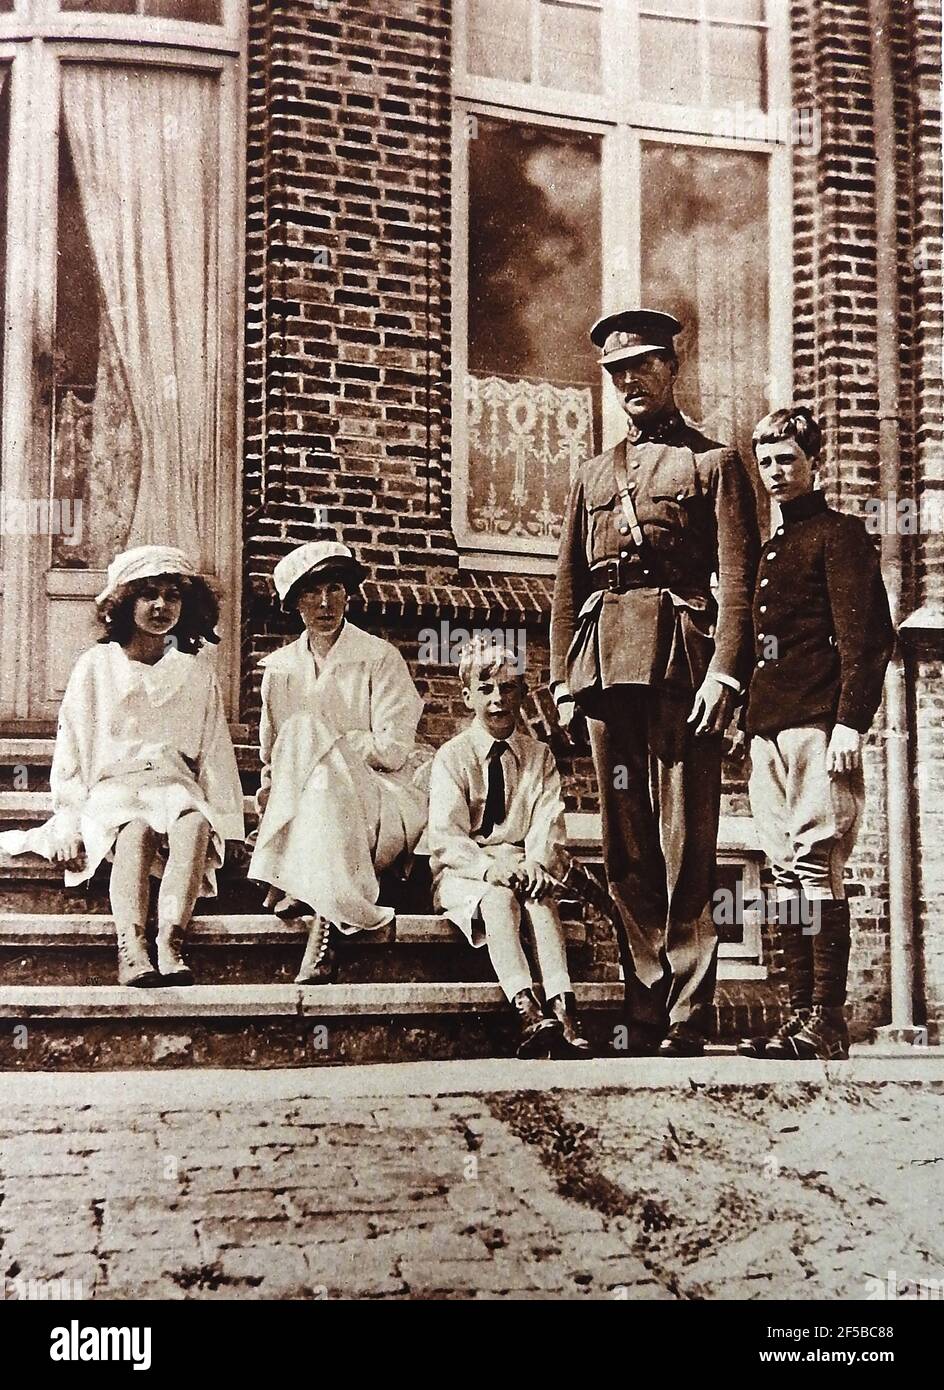 WWI - A rare family photograph of the full Belgian Royal Family at their villa in devastated Flanders. King Albert  I, his wife Duchess Elisabeth of Bavaria, and children Léopold Philippe Charles Albert Meinrad Hubert Marie Miguel,Prince Charles Théodore Henri Antoine Meinrad, Count of Flanders and Marie-José Charlotte Sophie Amélie Henriette Gabrielle,, later Queen of Italy. Theking was known as Albert Leopold Clemens Maria Meinrad in Dutch, Albert Léopold Clément Marie Meinrad in French and Albert Leopold Clemens Maria Meinrad in German Stock Photo